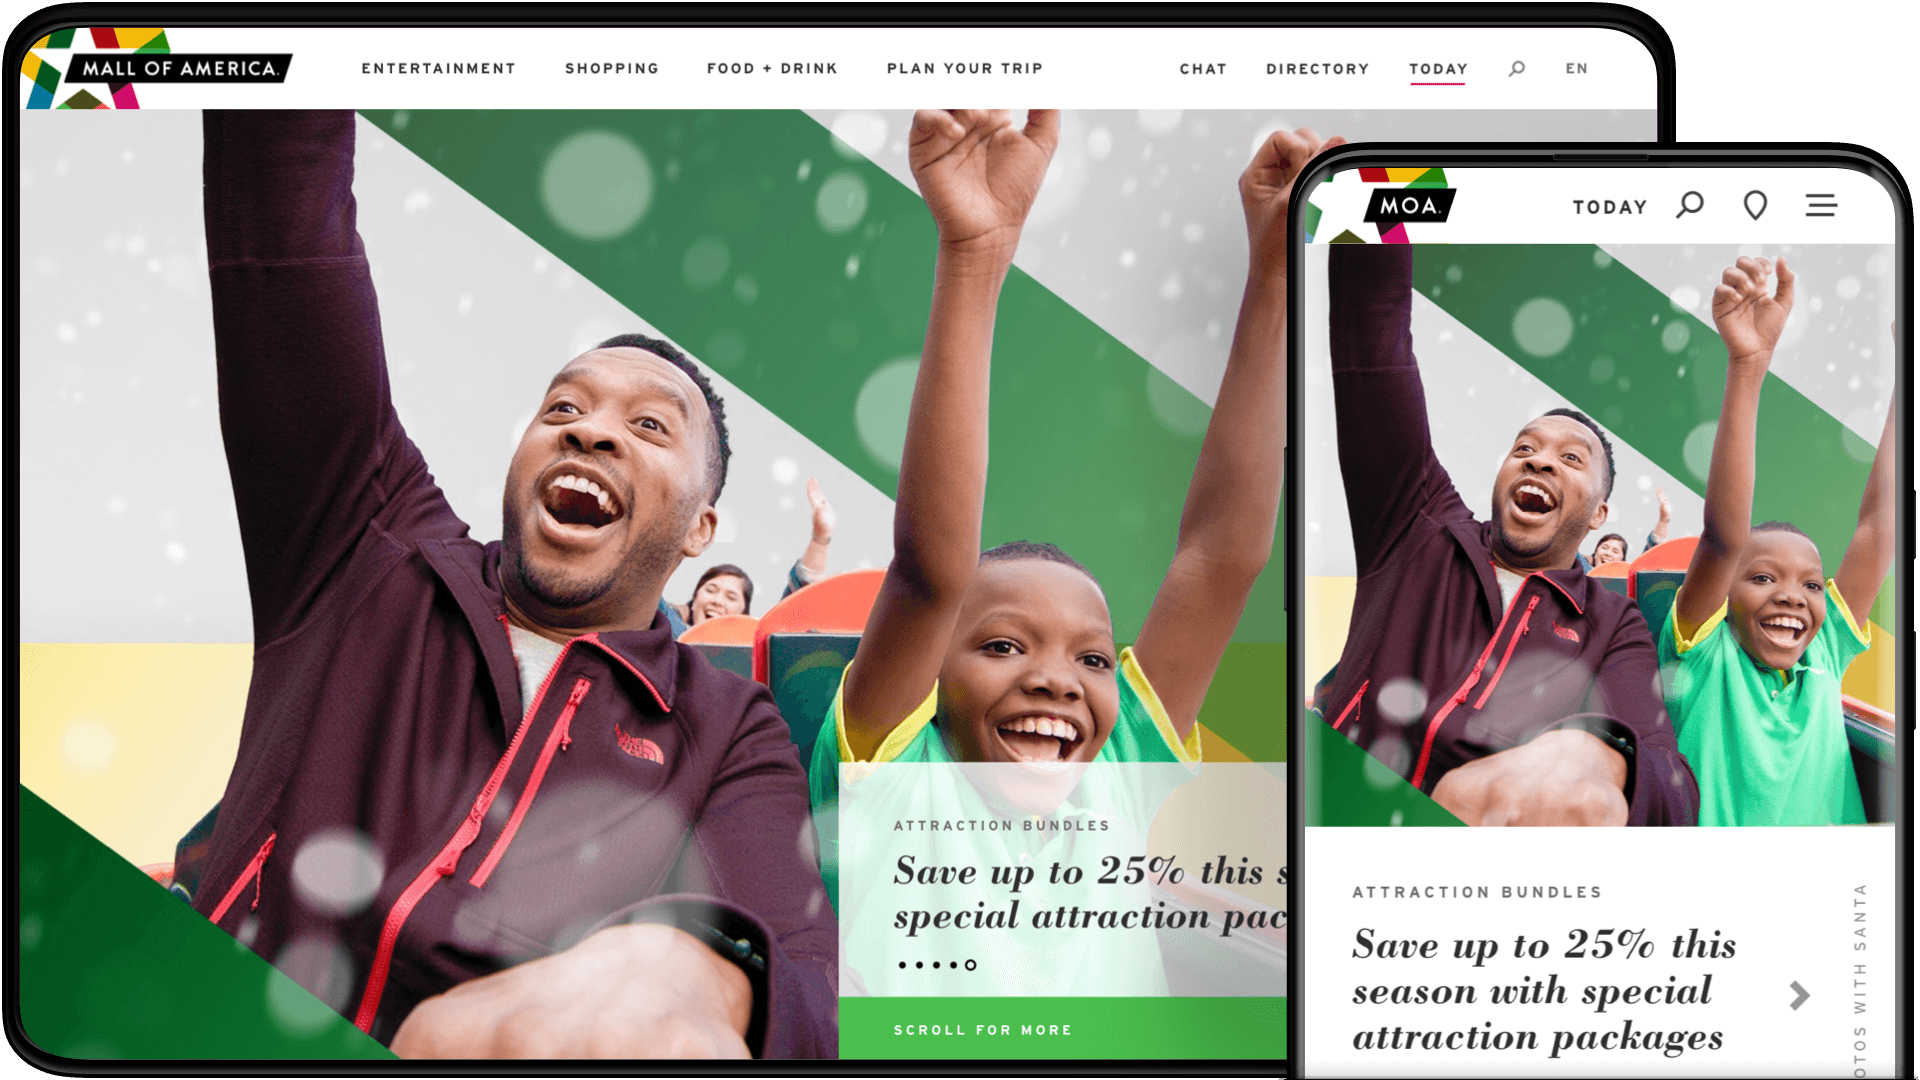 Hero image of the Mall of America website redesign